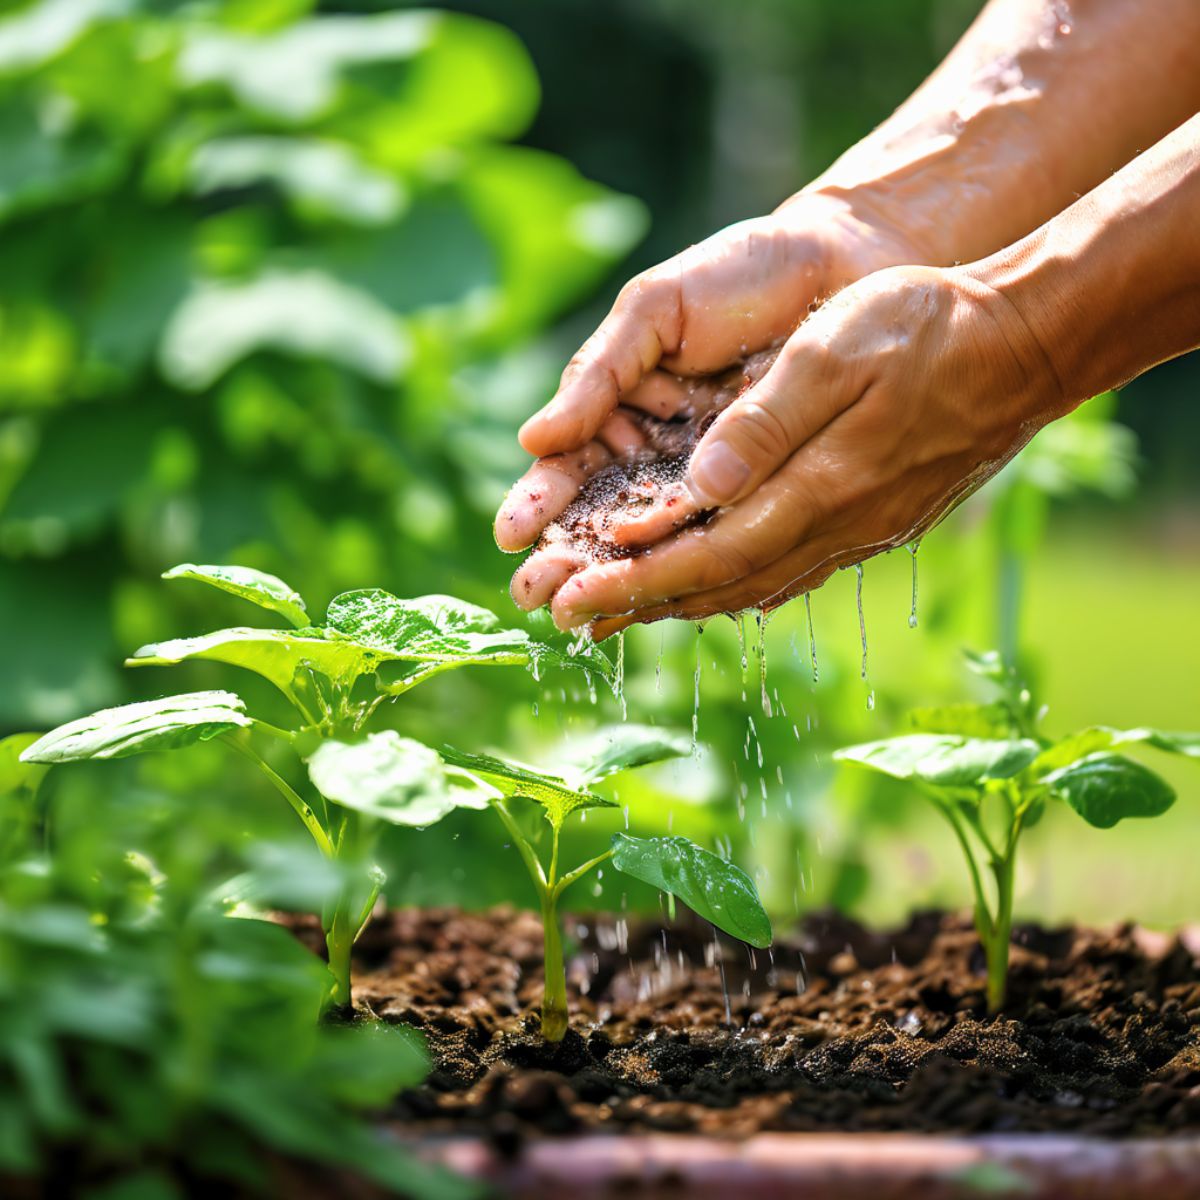 The International Day of Plant Health acknowledges the crucial role plants play in sustaining life.